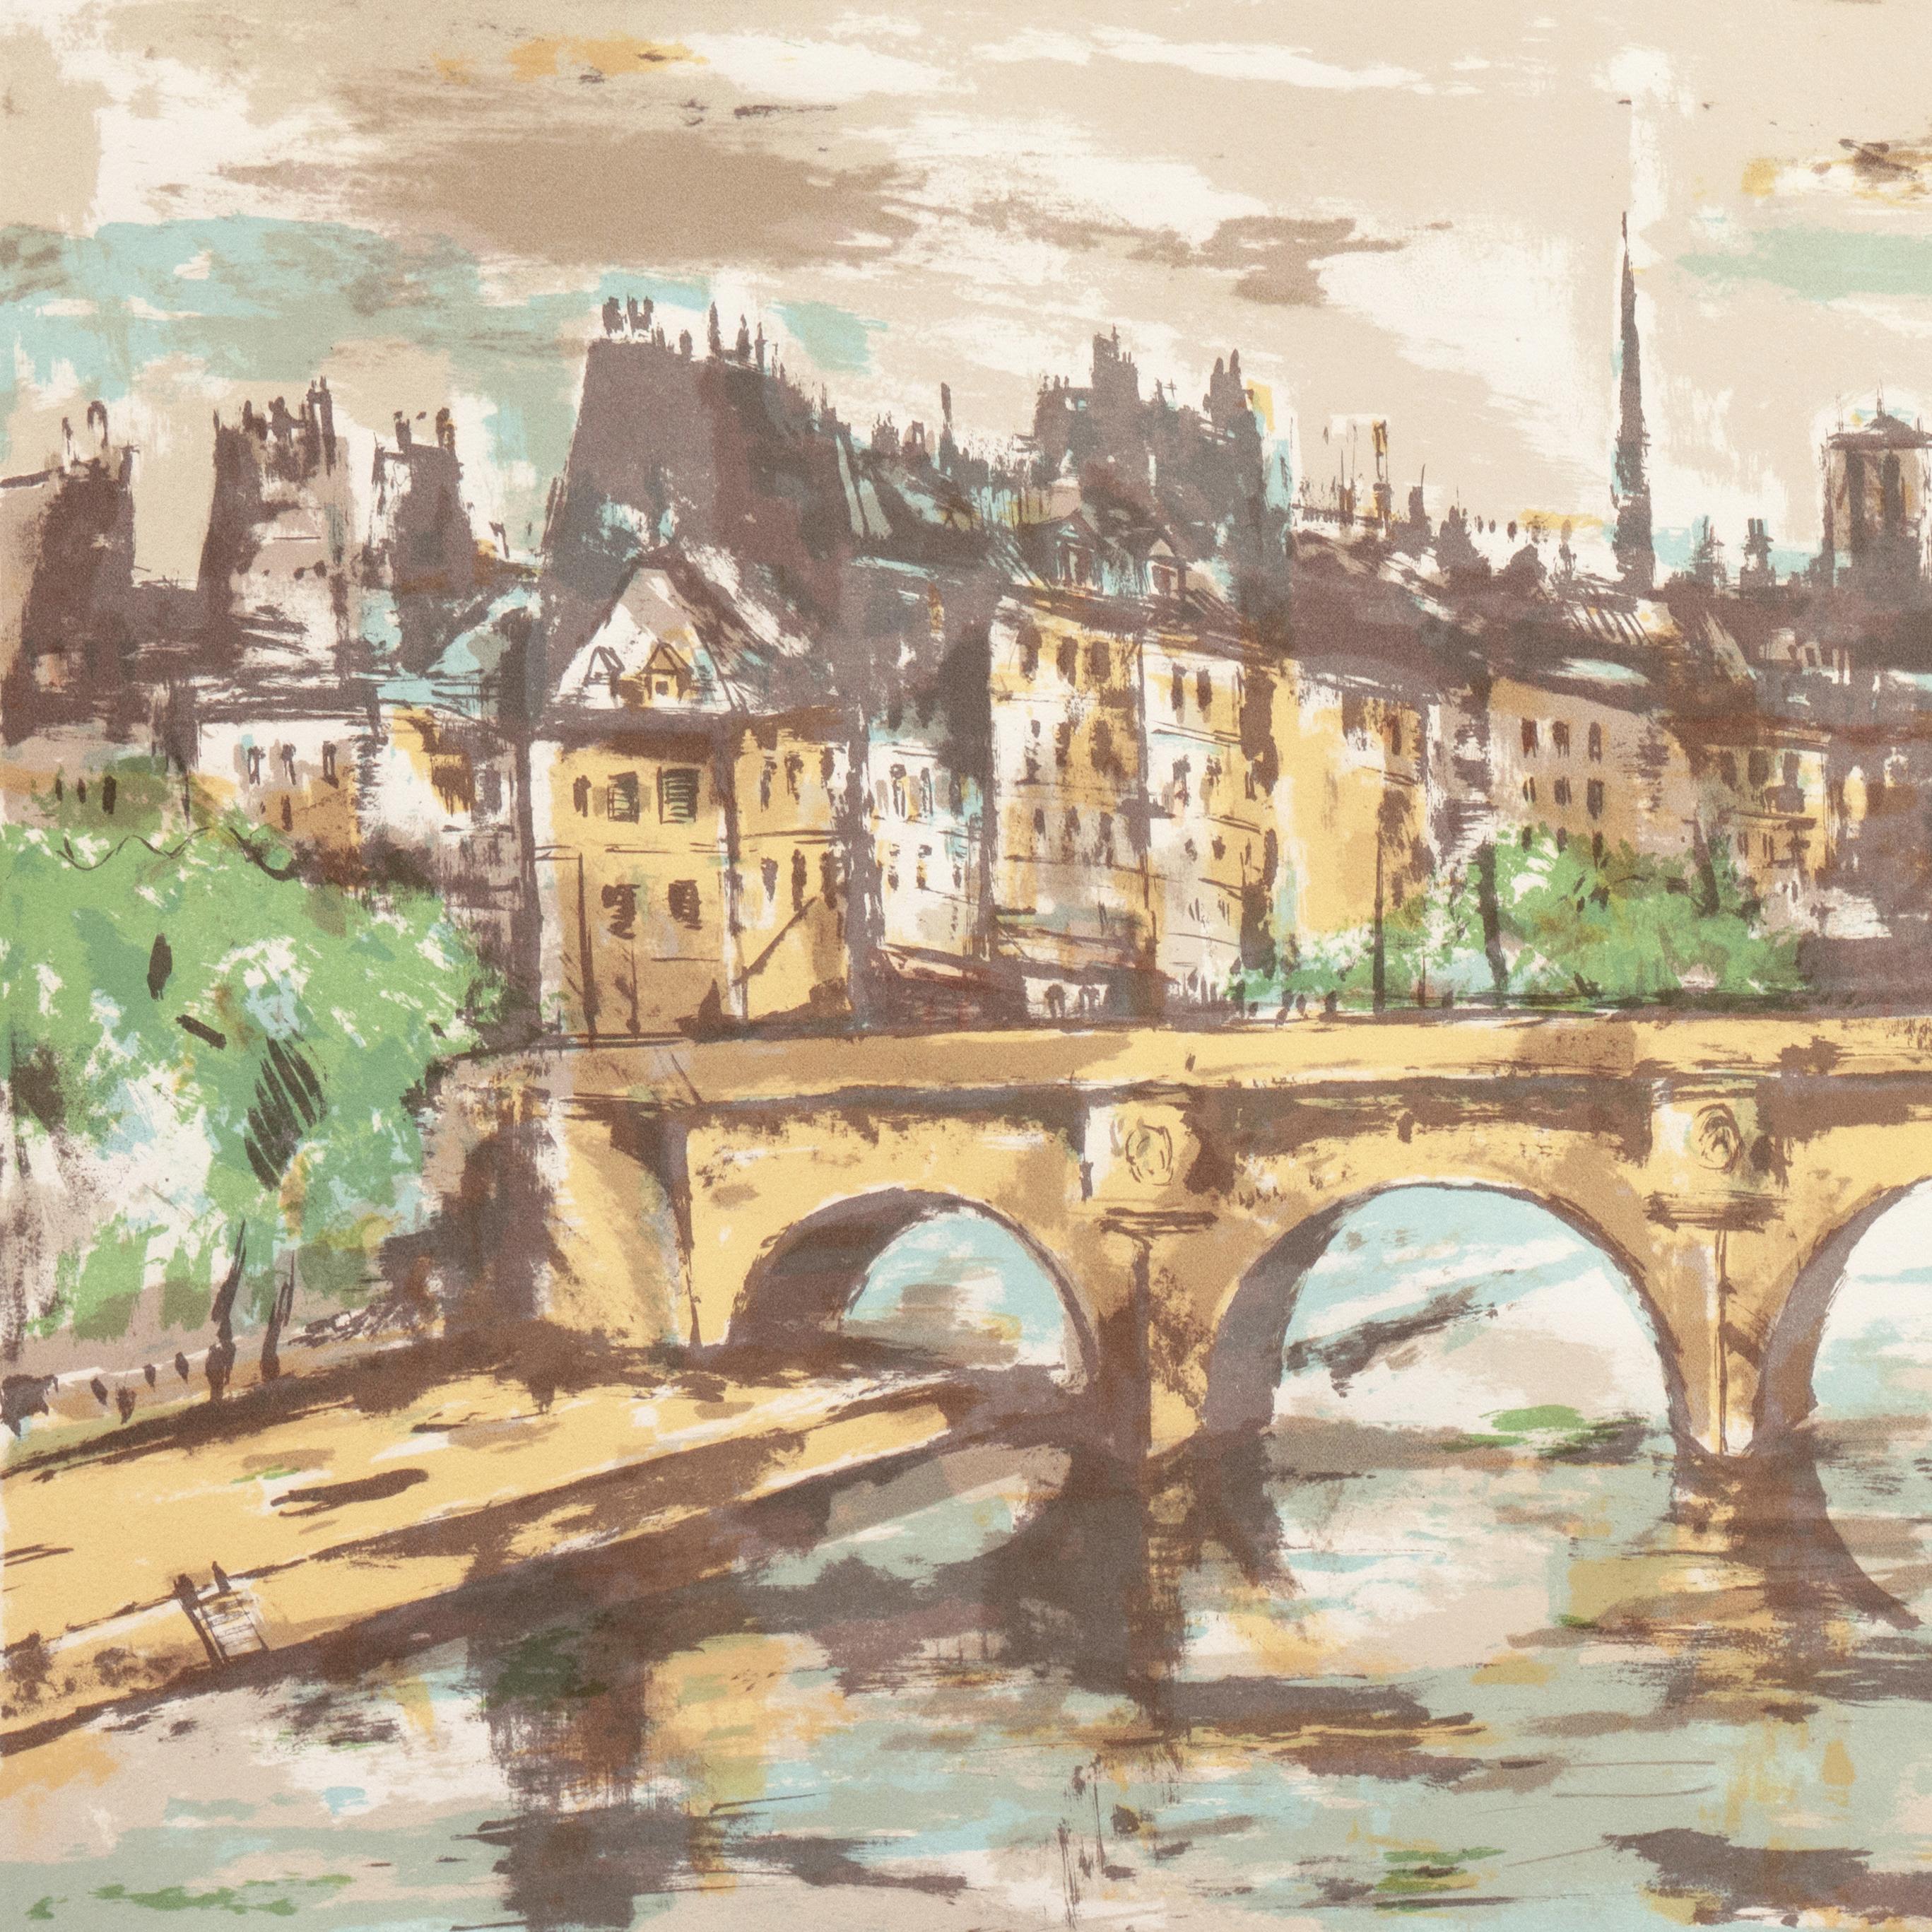 'The Pont Neuf with Notre Dame in the Distance', Tokyo Fine Arts Academy - Post-Impressionist Print by Kazunari Ogata